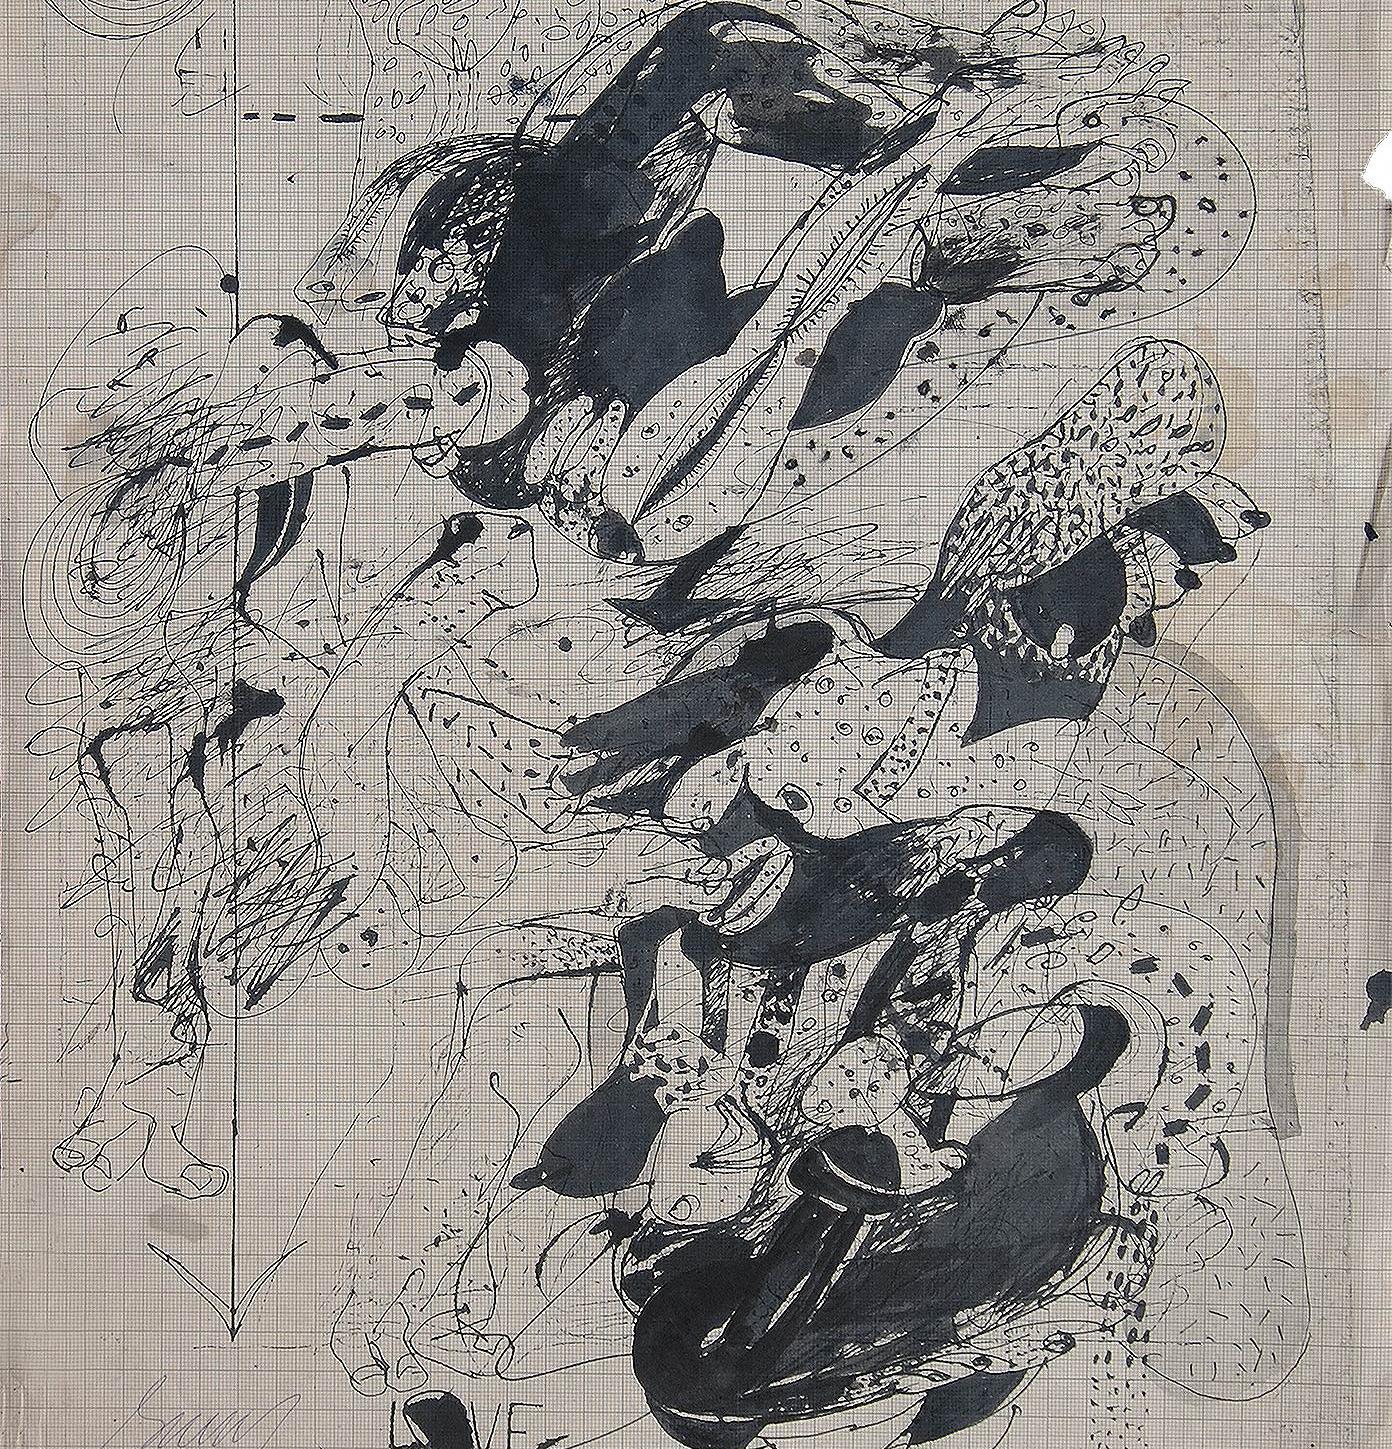 Jottings, Pen & Ink on Graph Paper, Black & White by Indian Artist 